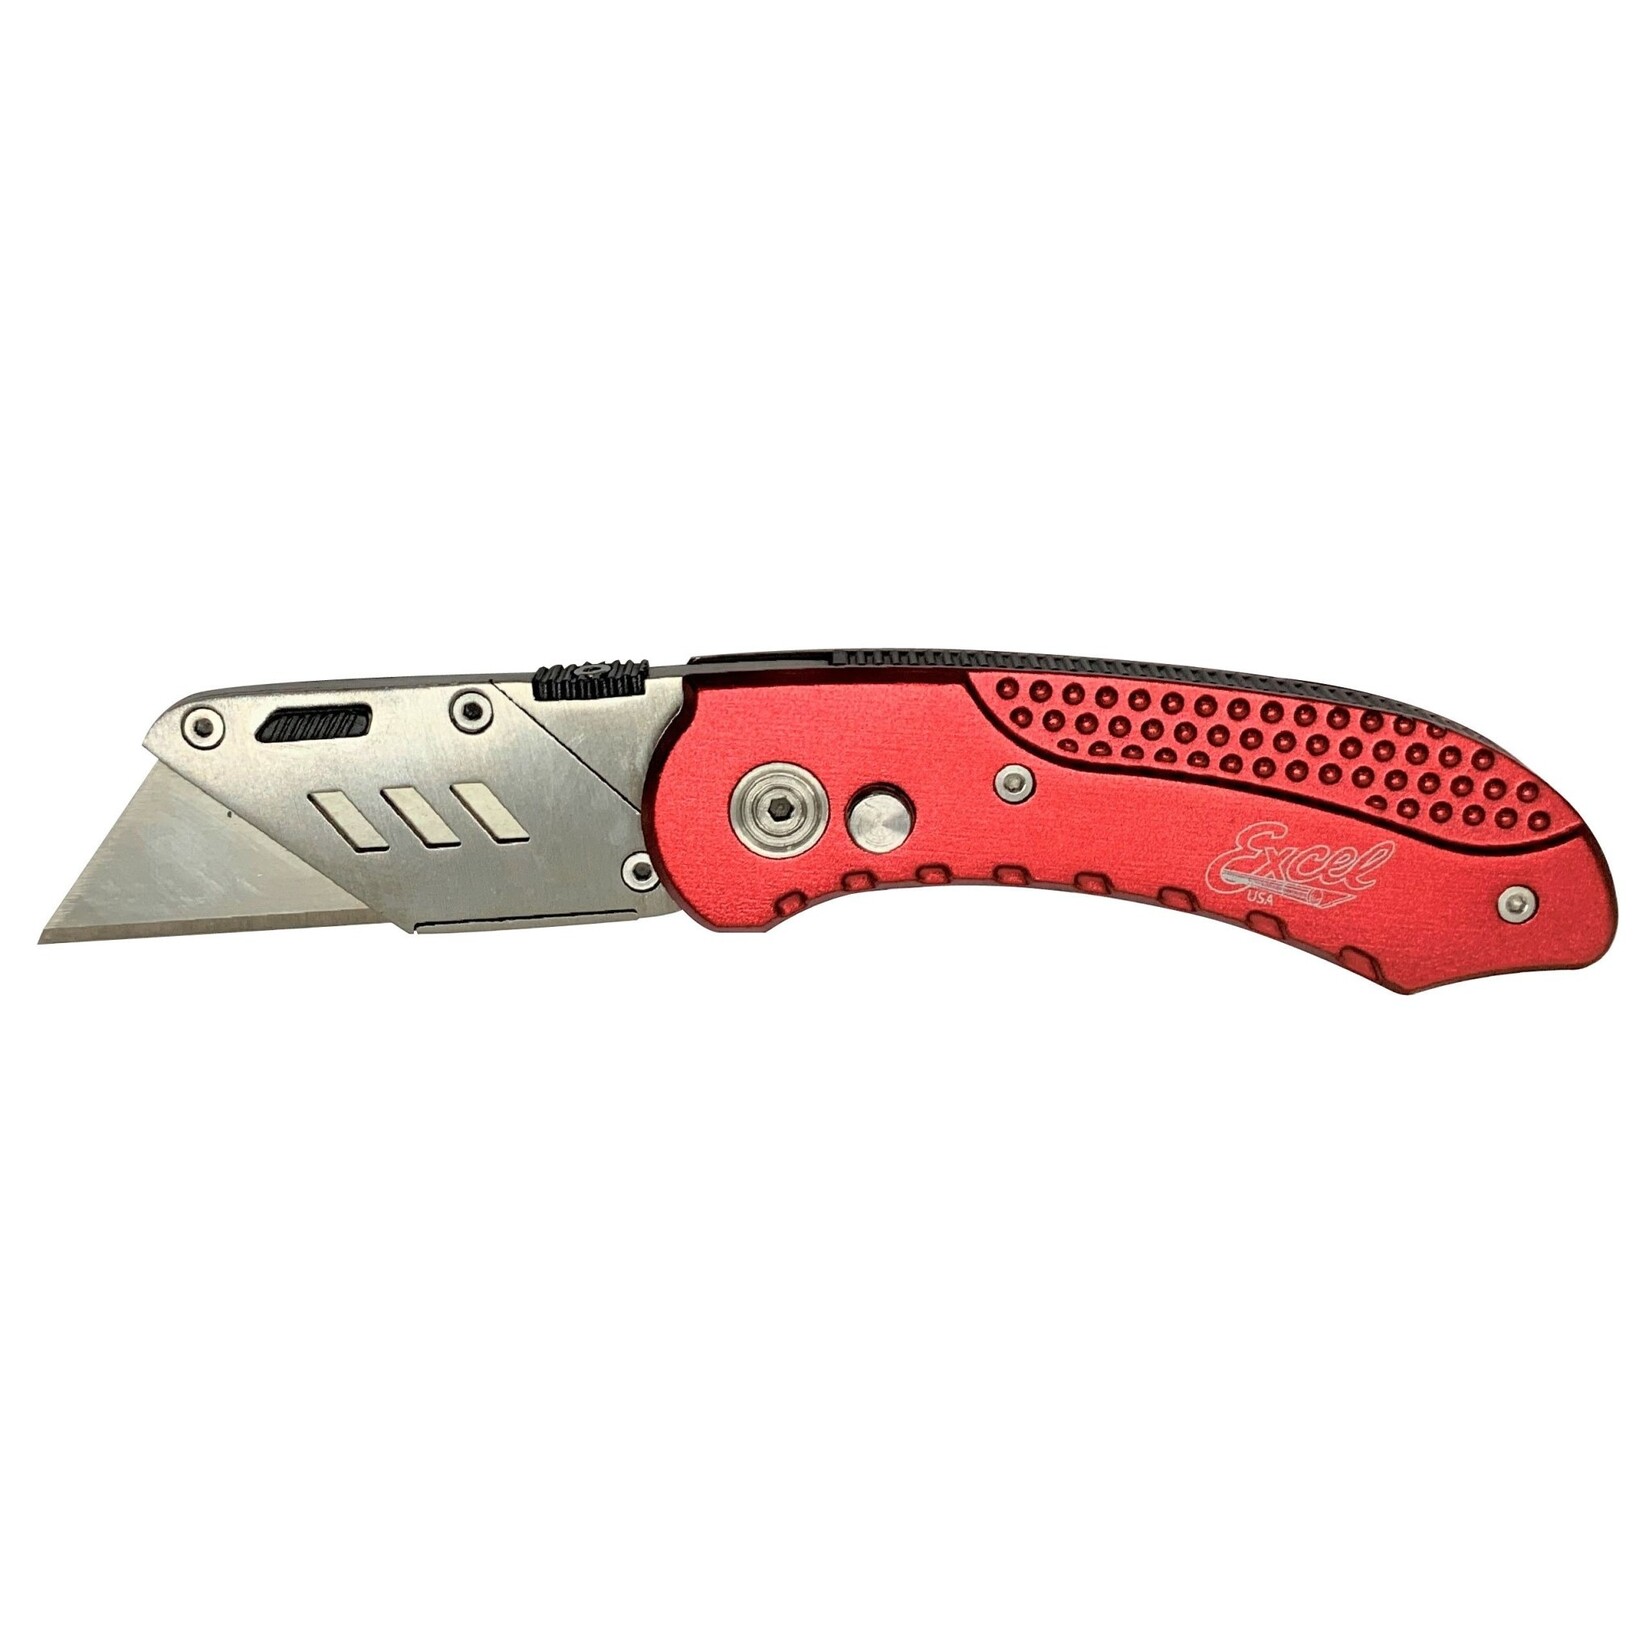 Excel K55 Folding Lock Utility Knife with6 Blades